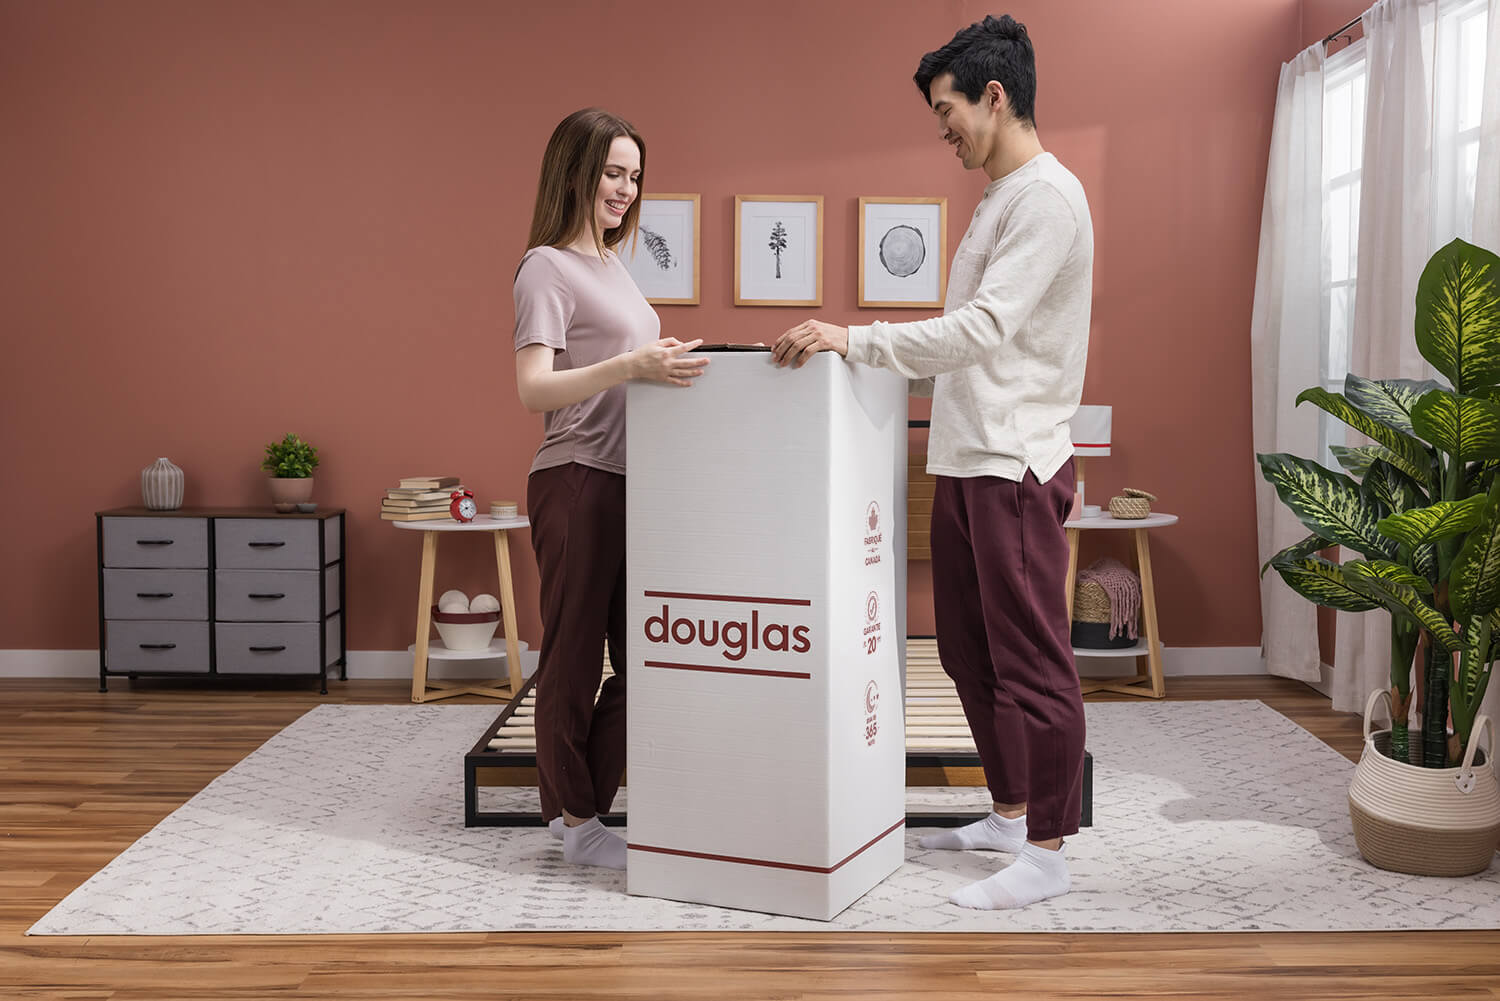 A couple unboxing a Douglas mattress in their bedroom